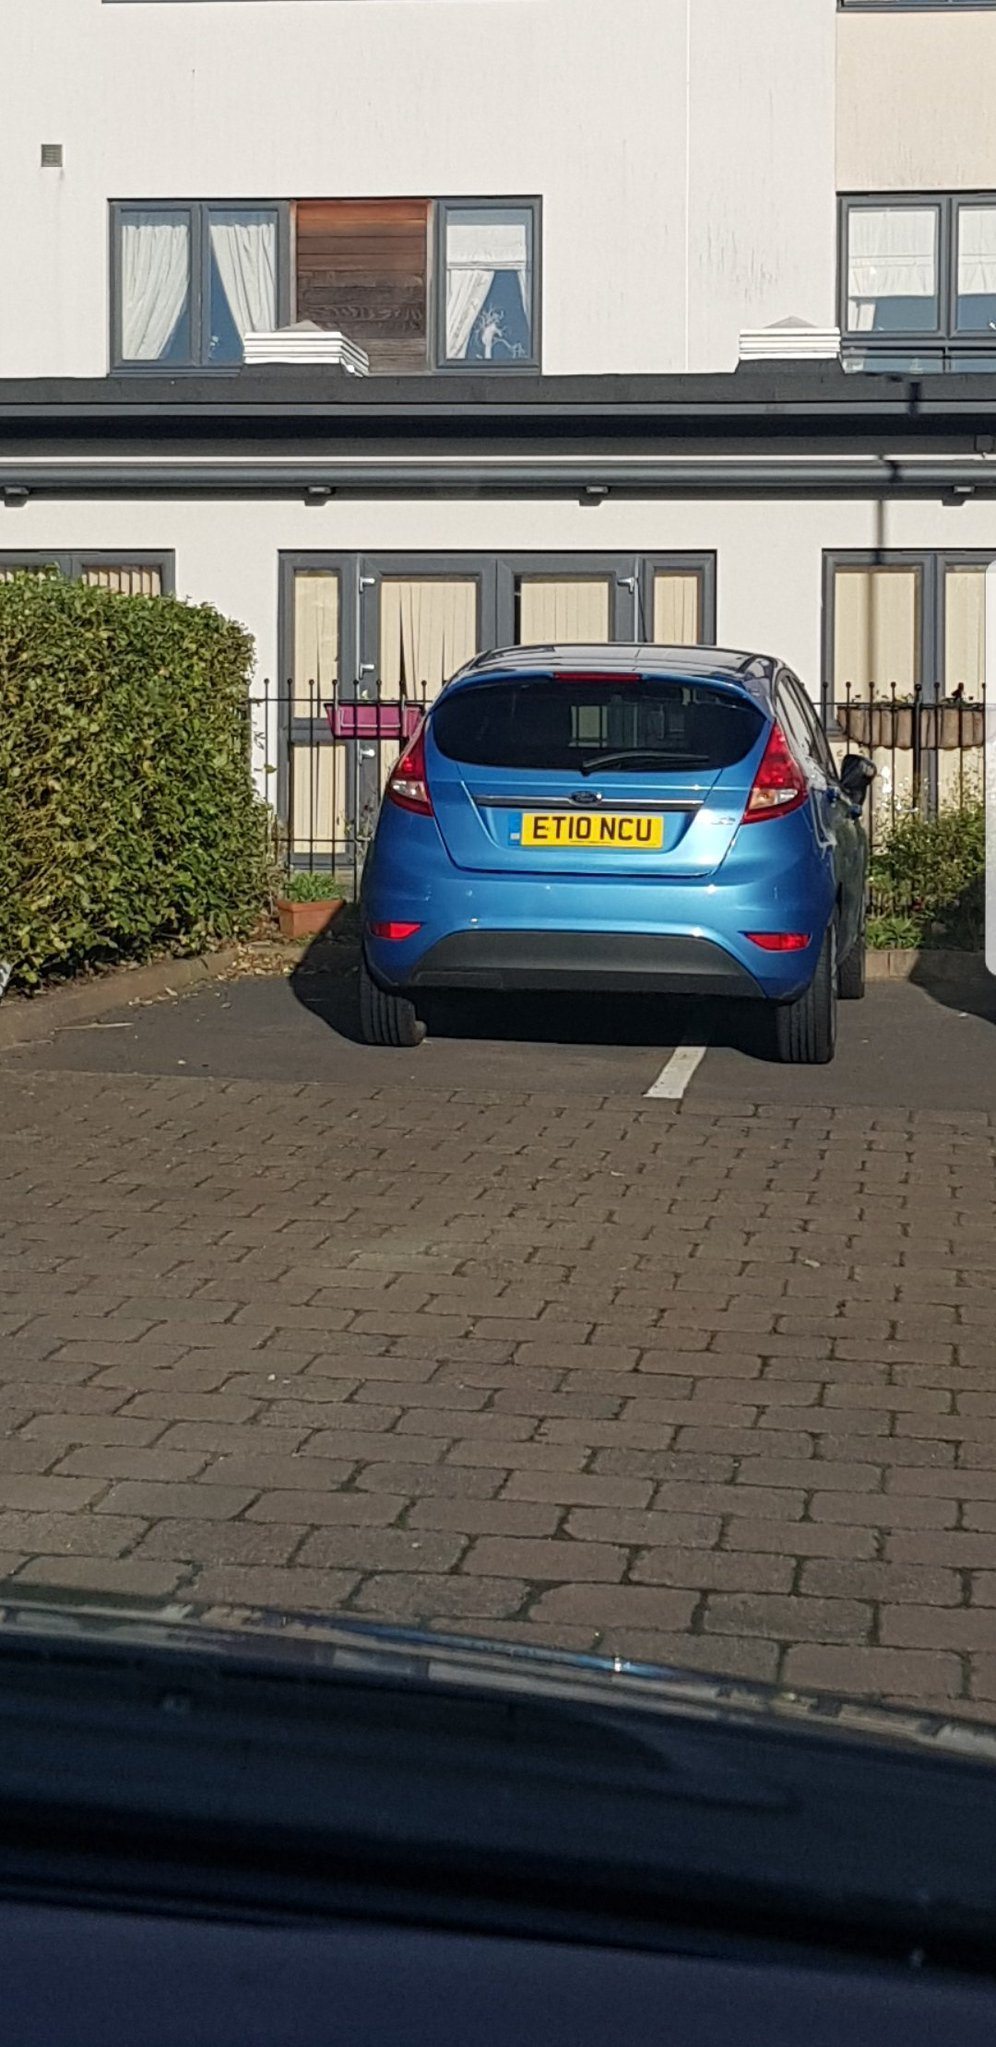 ET10 NCU is an Inconsiderate Parker